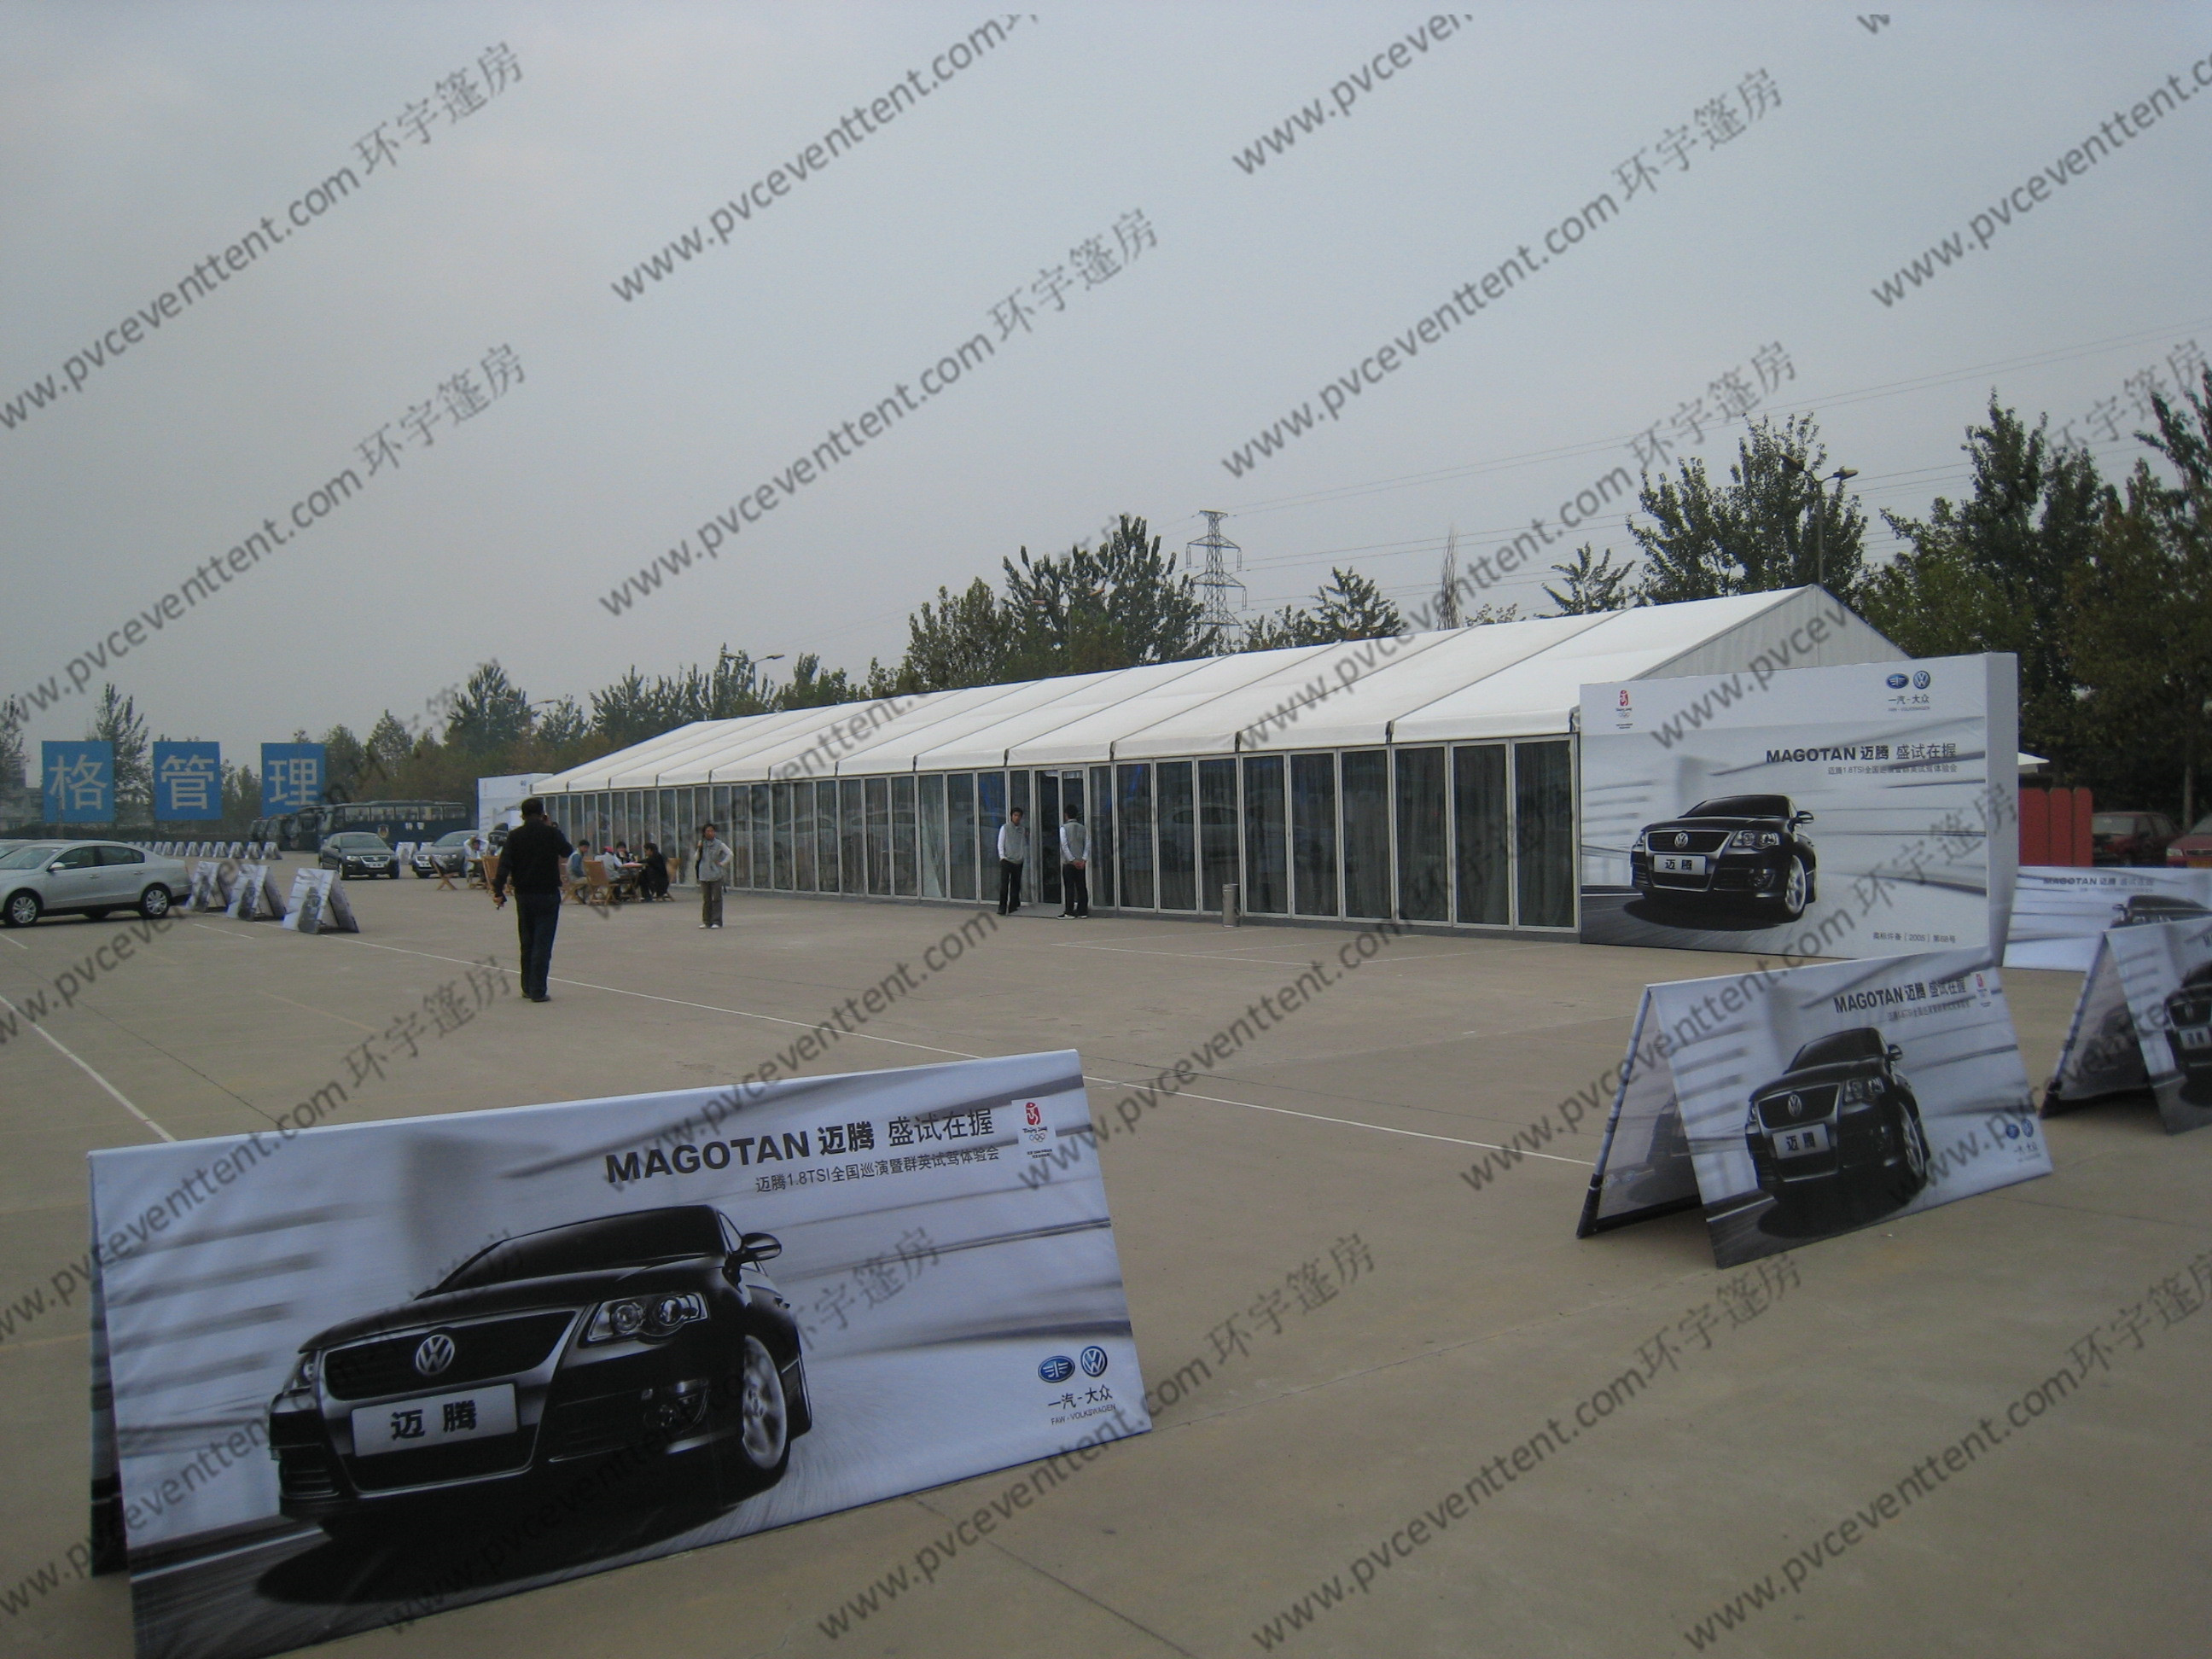 8x40m Heavy Duty Big Aluminum Outdoor Event Tents with White Roof Covers & Glass Sidewalls for Car Show